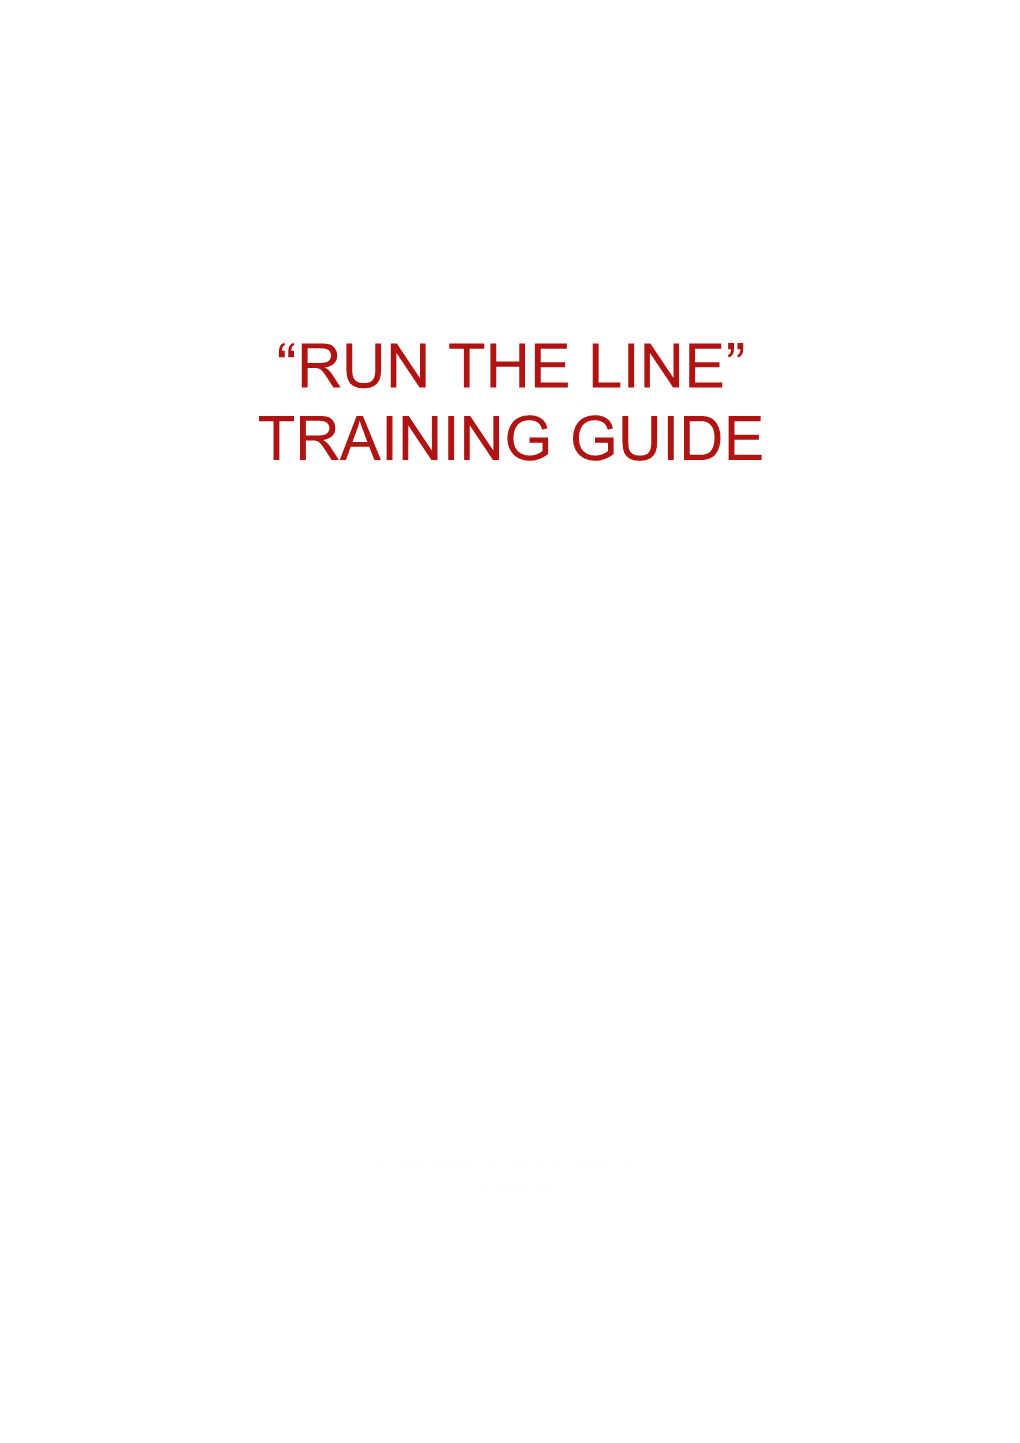 Run the Line Training Guide